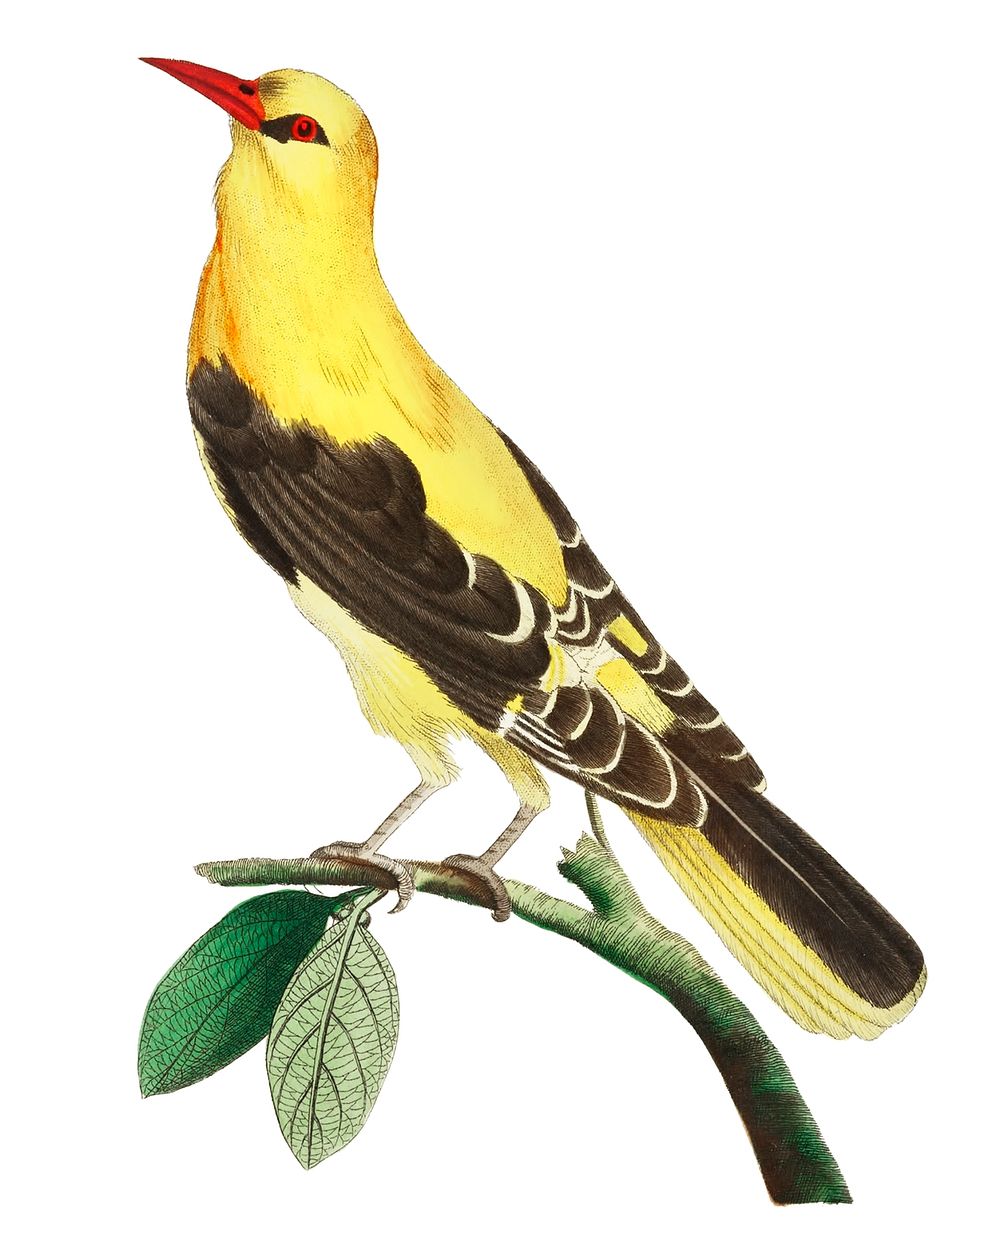 Golden Oriole or Golden thrush illustration from The Naturalist's Miscellany (1789-1813) by George Shaw (1751-1813)